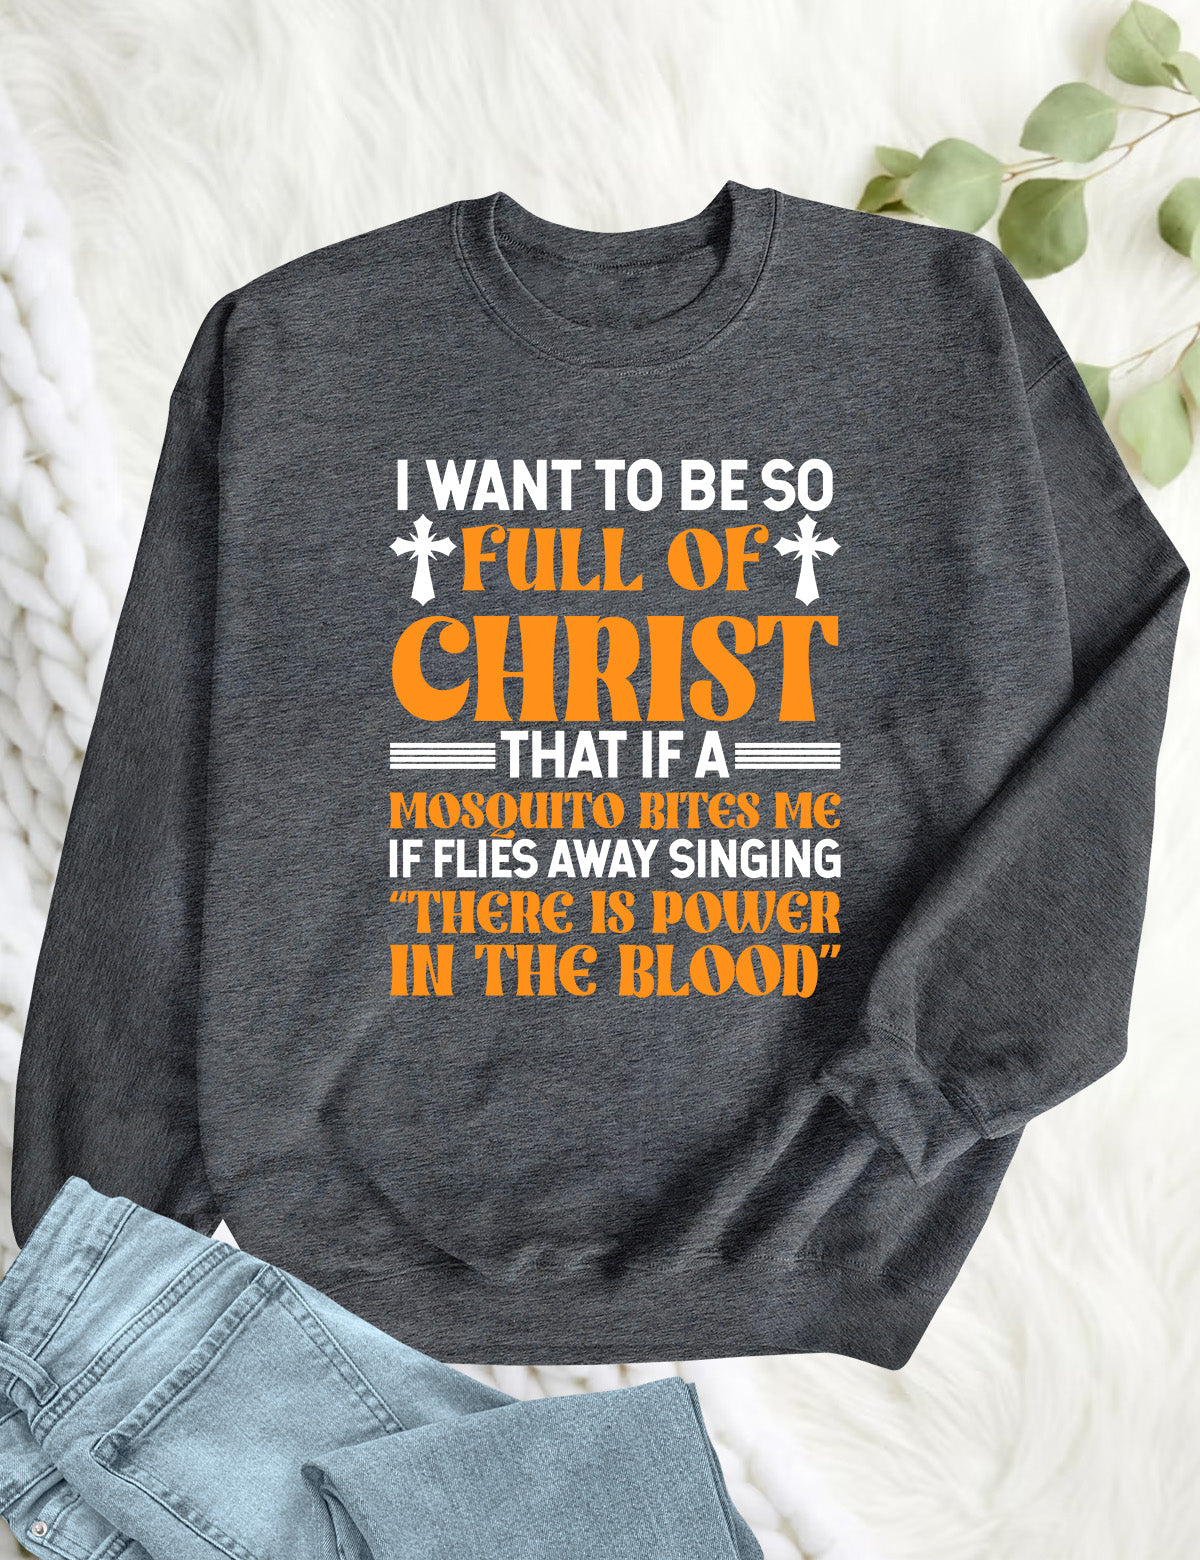 I Want To Be So Full Of Christ Power in The Blood Sweatshirts